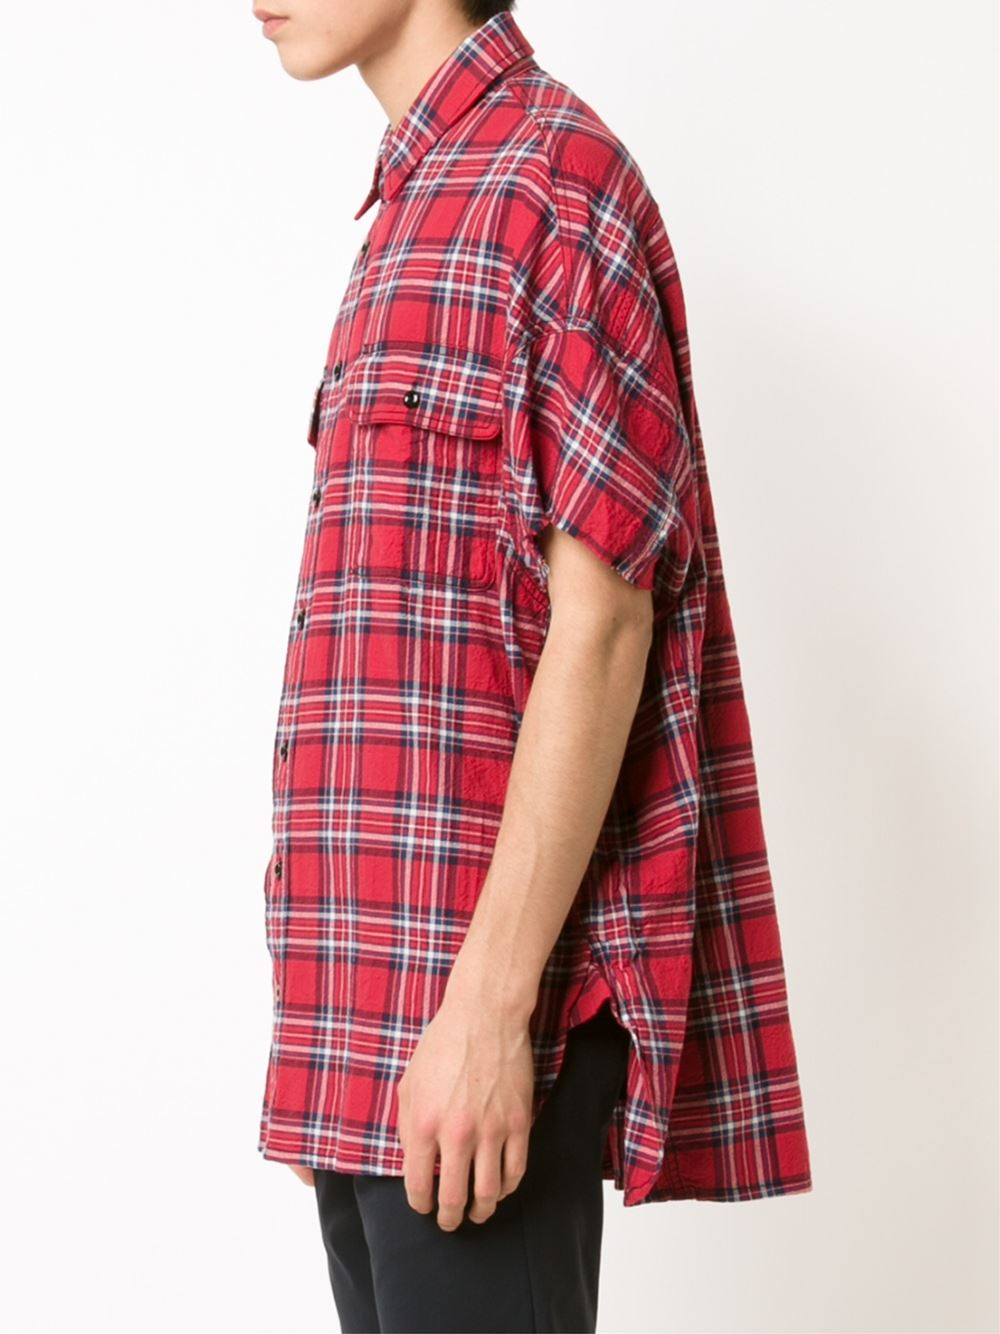 Lyst - R13 Plaid Short Sleeve Shirt in Red for Men